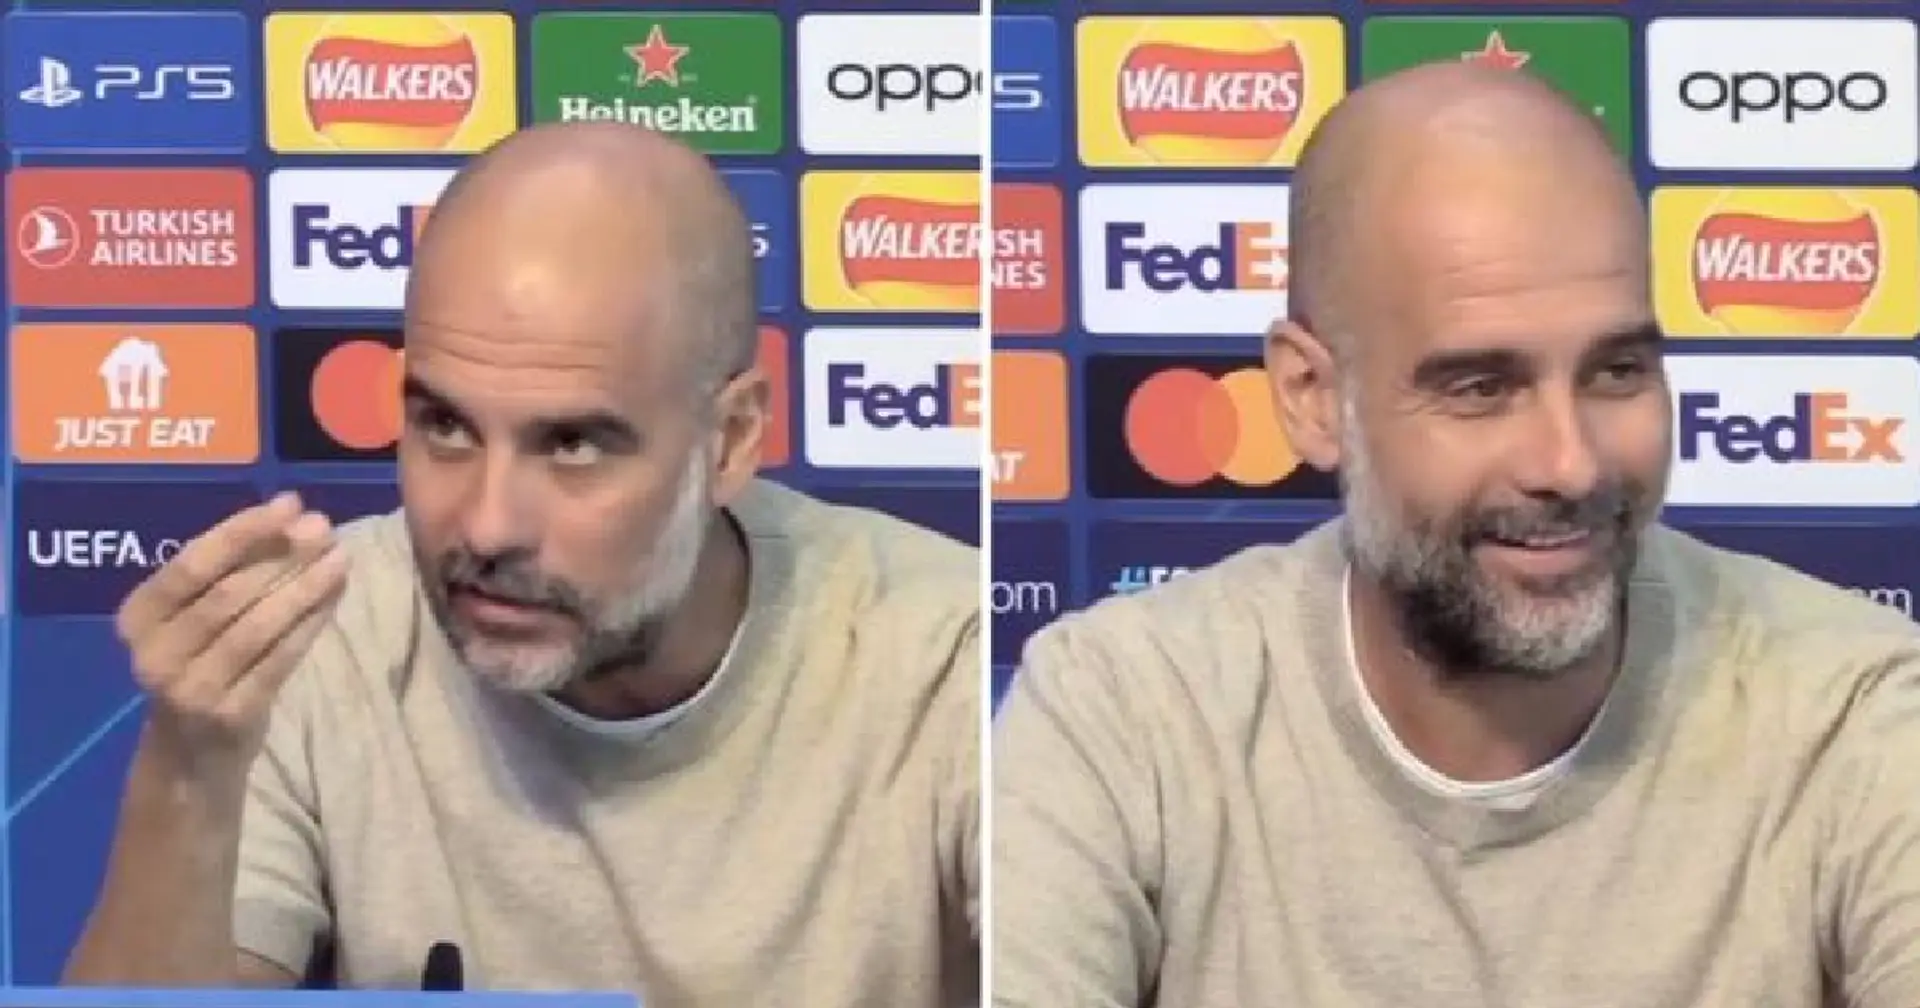 Pep Guardiola's first reaction when asked about Man United's poor start to the season